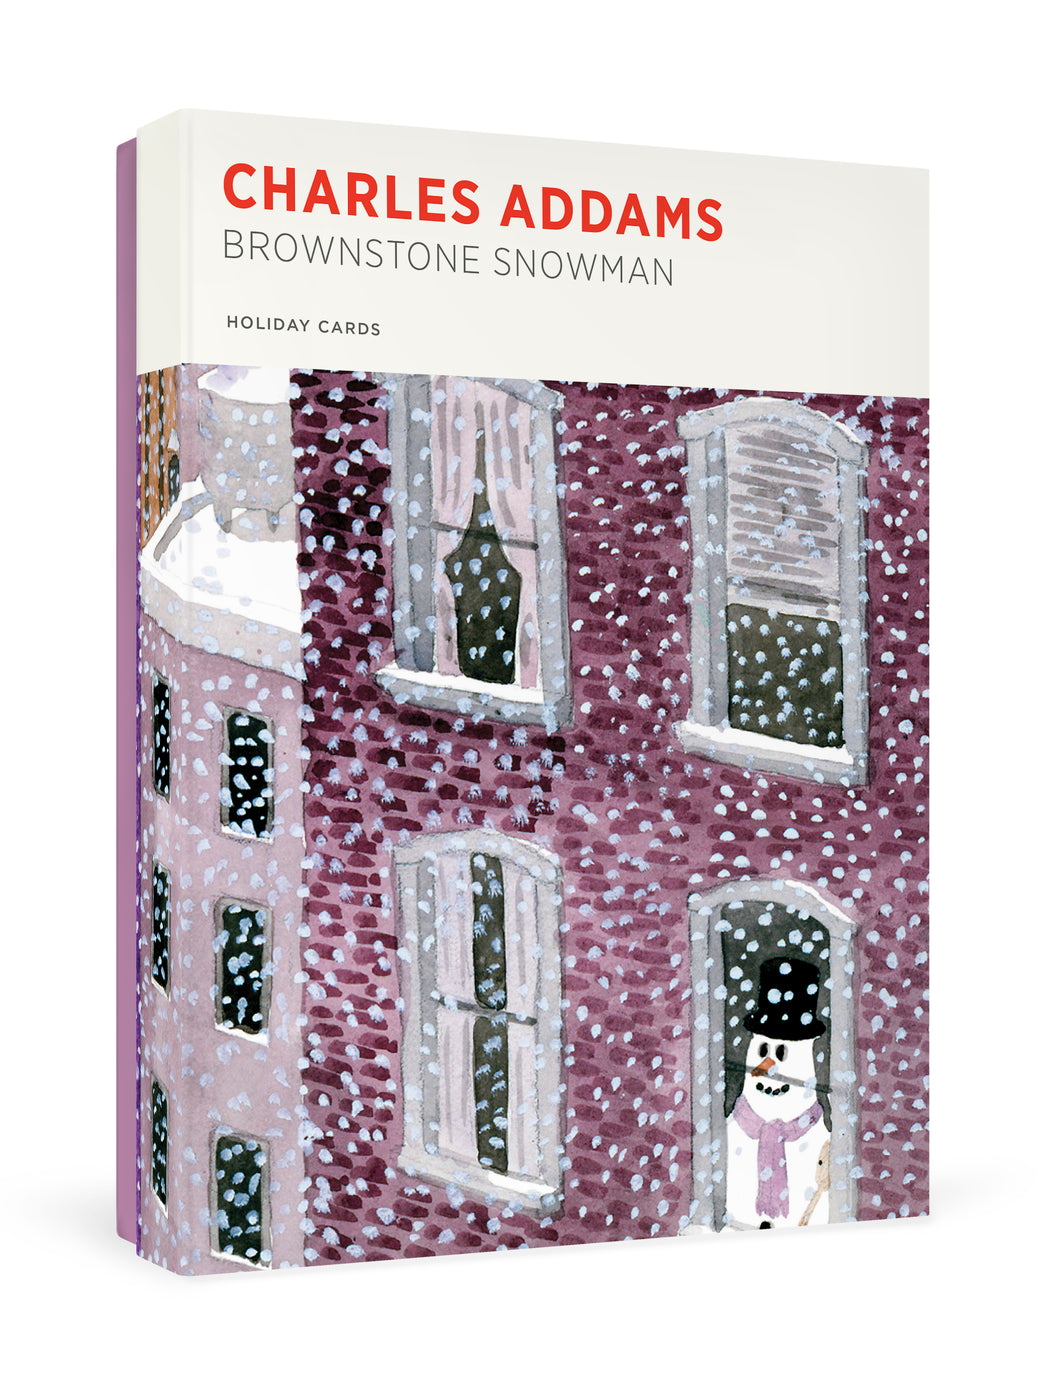 Charles Addams: Brownstone Snowman Holiday Cards_Front_3D